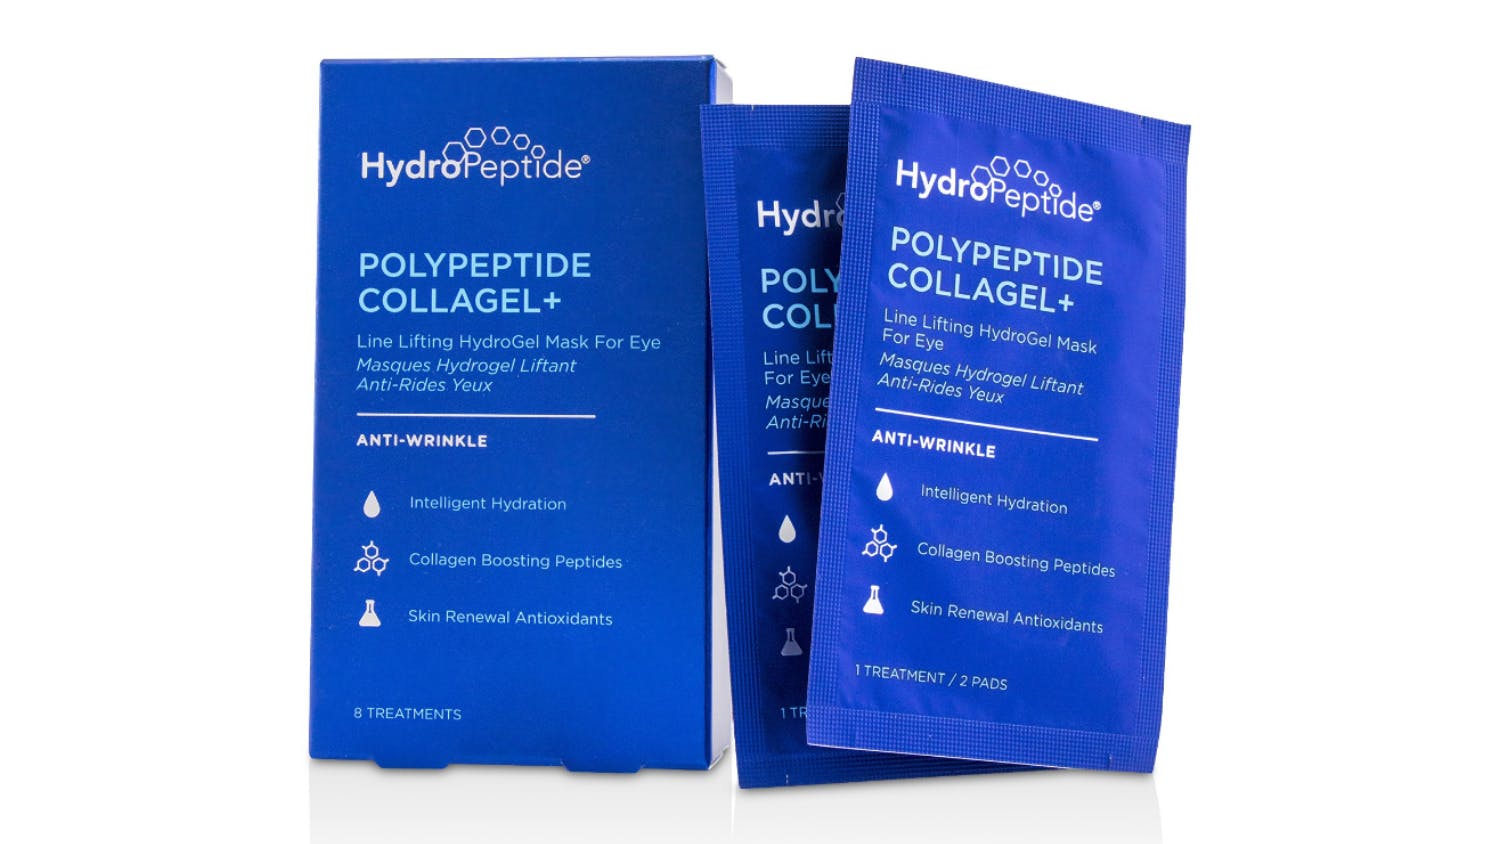 HydroPeptide Polypeptide Collagel+ Line Lifting Hydrogel Mask For Eye - 8 Treatments